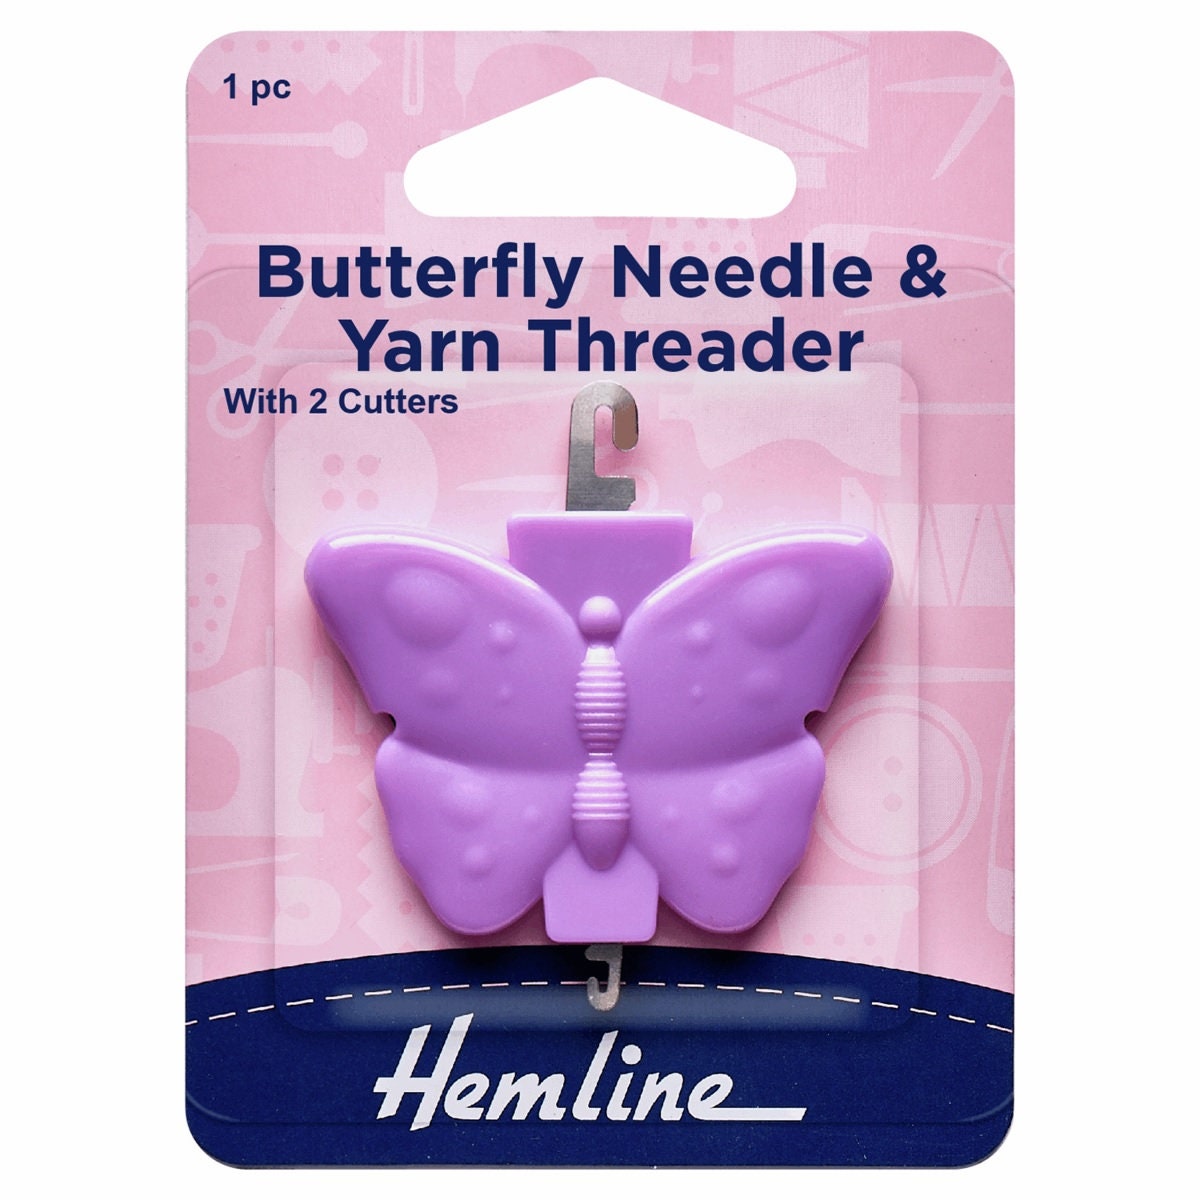 Hemline Butterfly Needle and Yarn Threader With 2 Cutters 